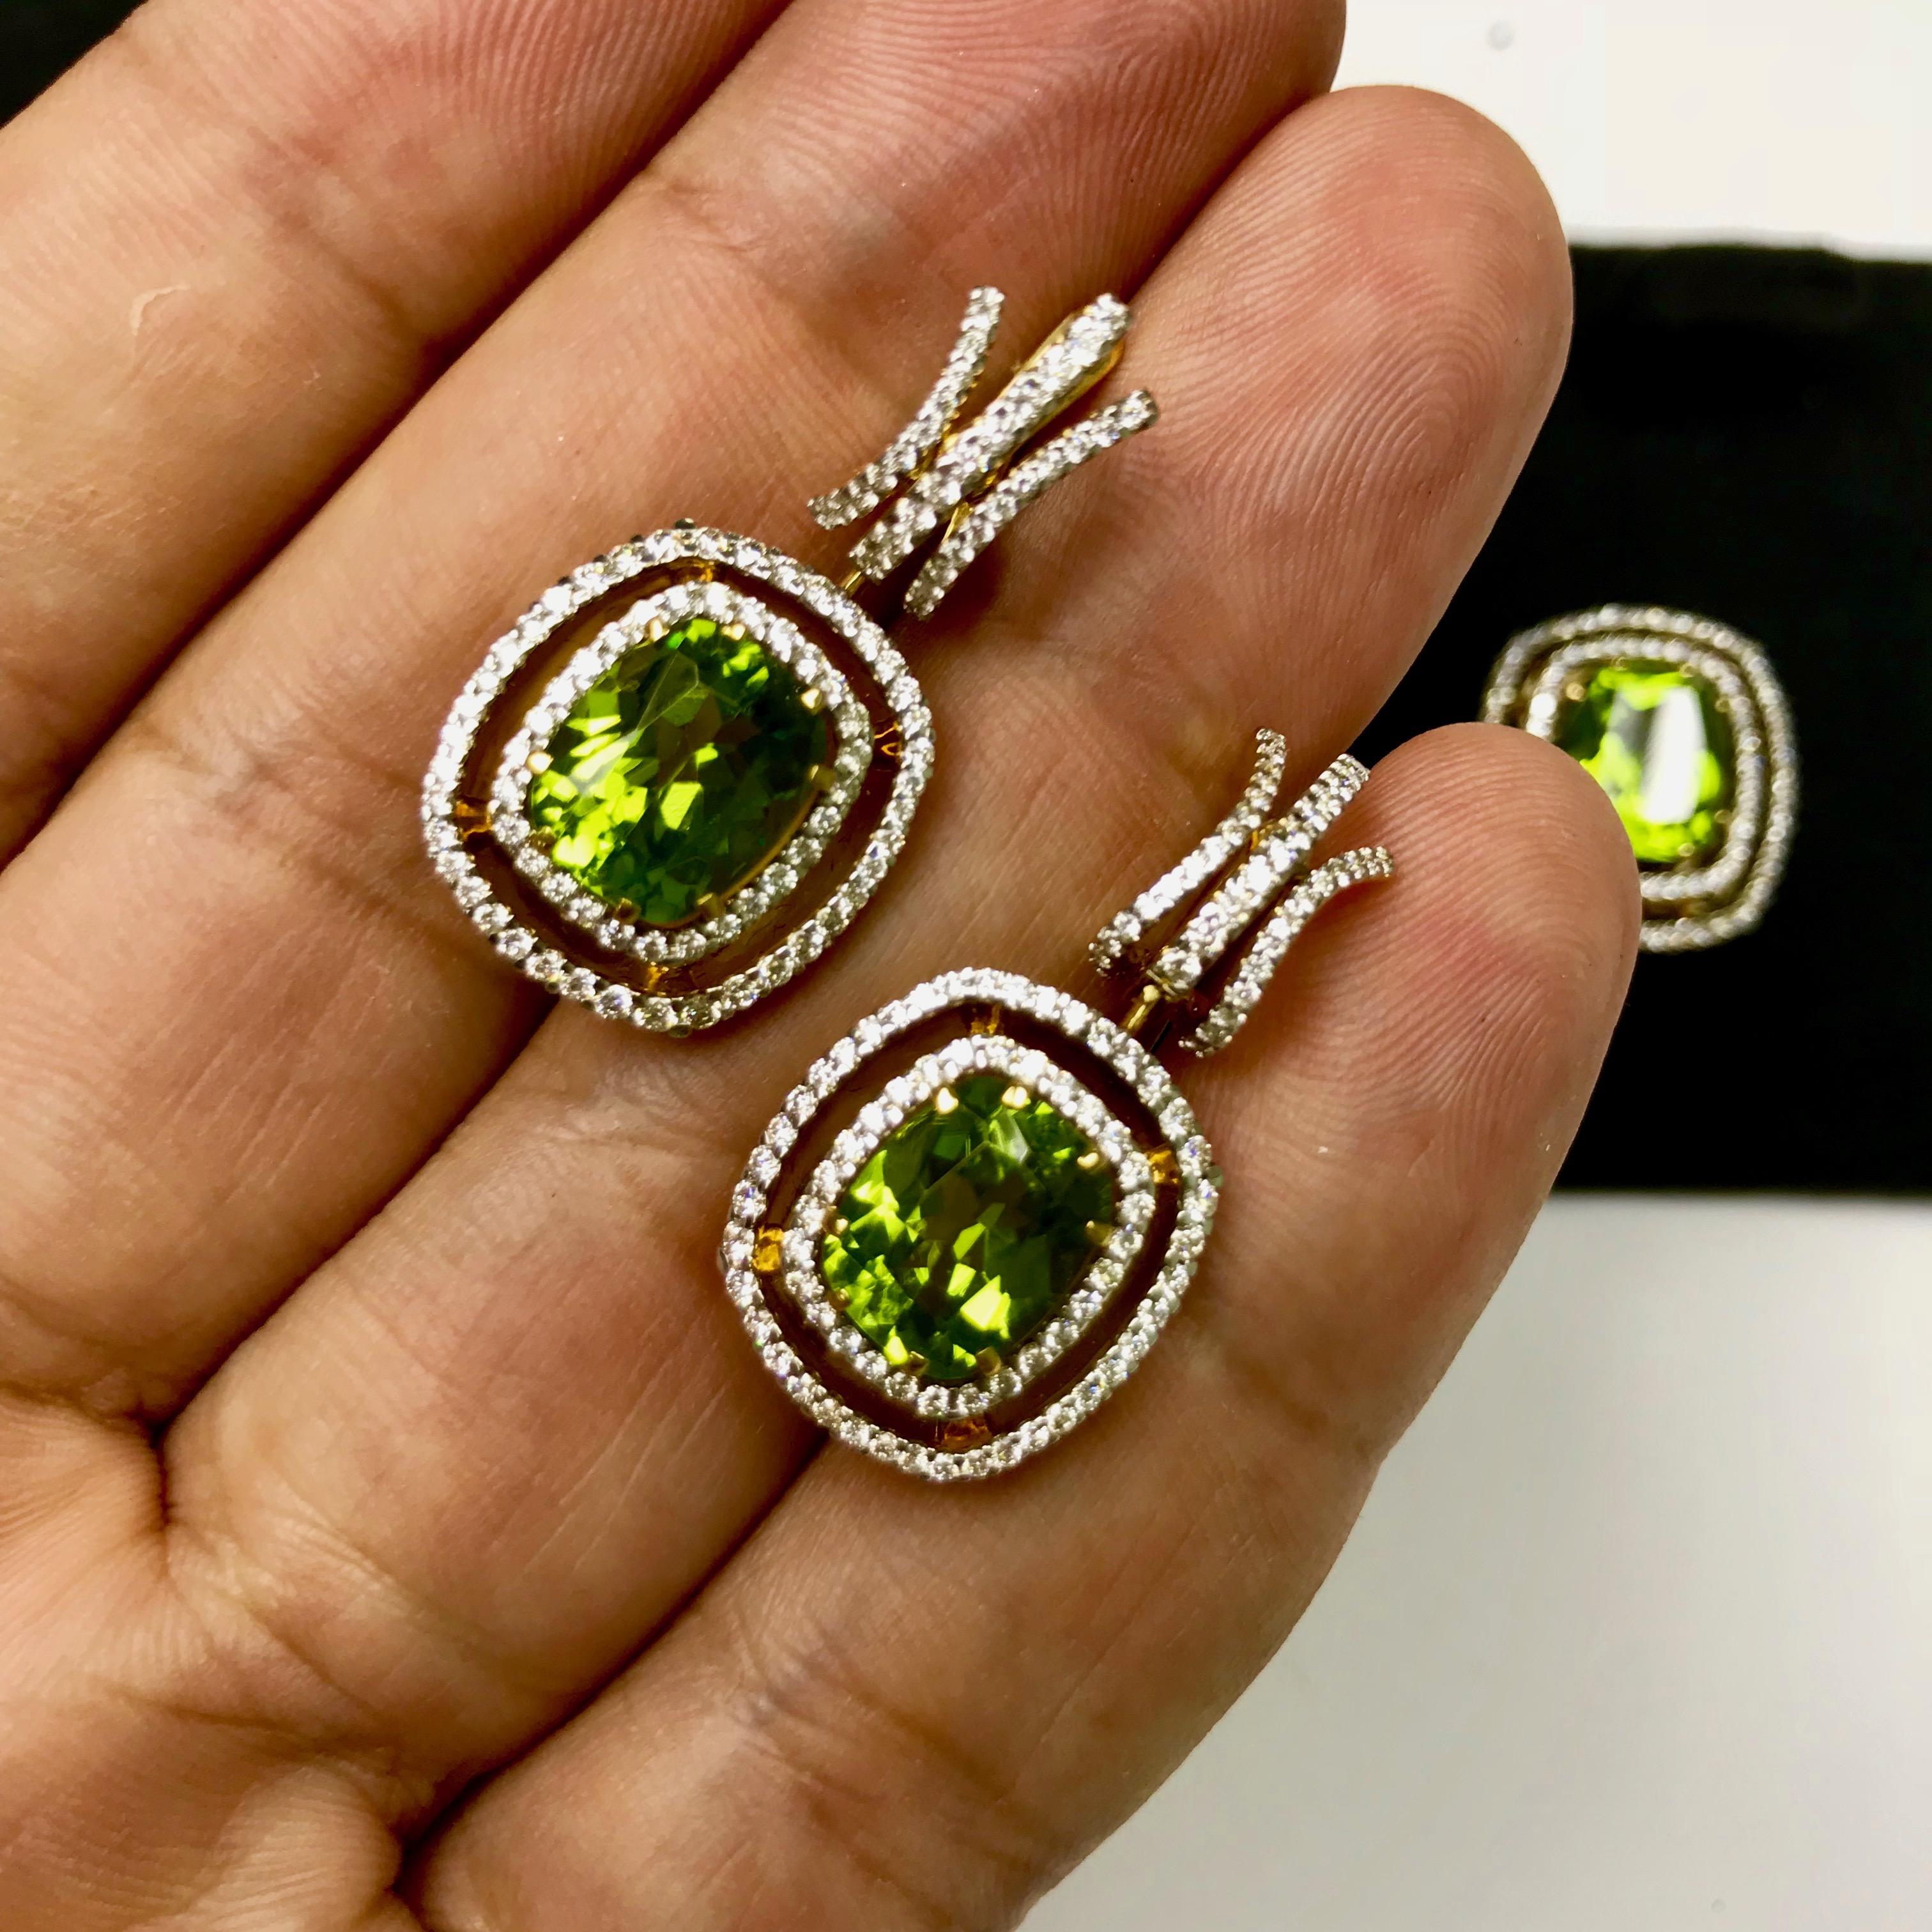 NeoClassical 7,24 carat pair of Peridot and 1.50 carat of Diamond 18 Karat Yellow Gold Earring. With nice texture. 
Also accompanied by Ring LU116414707781

15.8x33.1x9 mm
11.0 gm